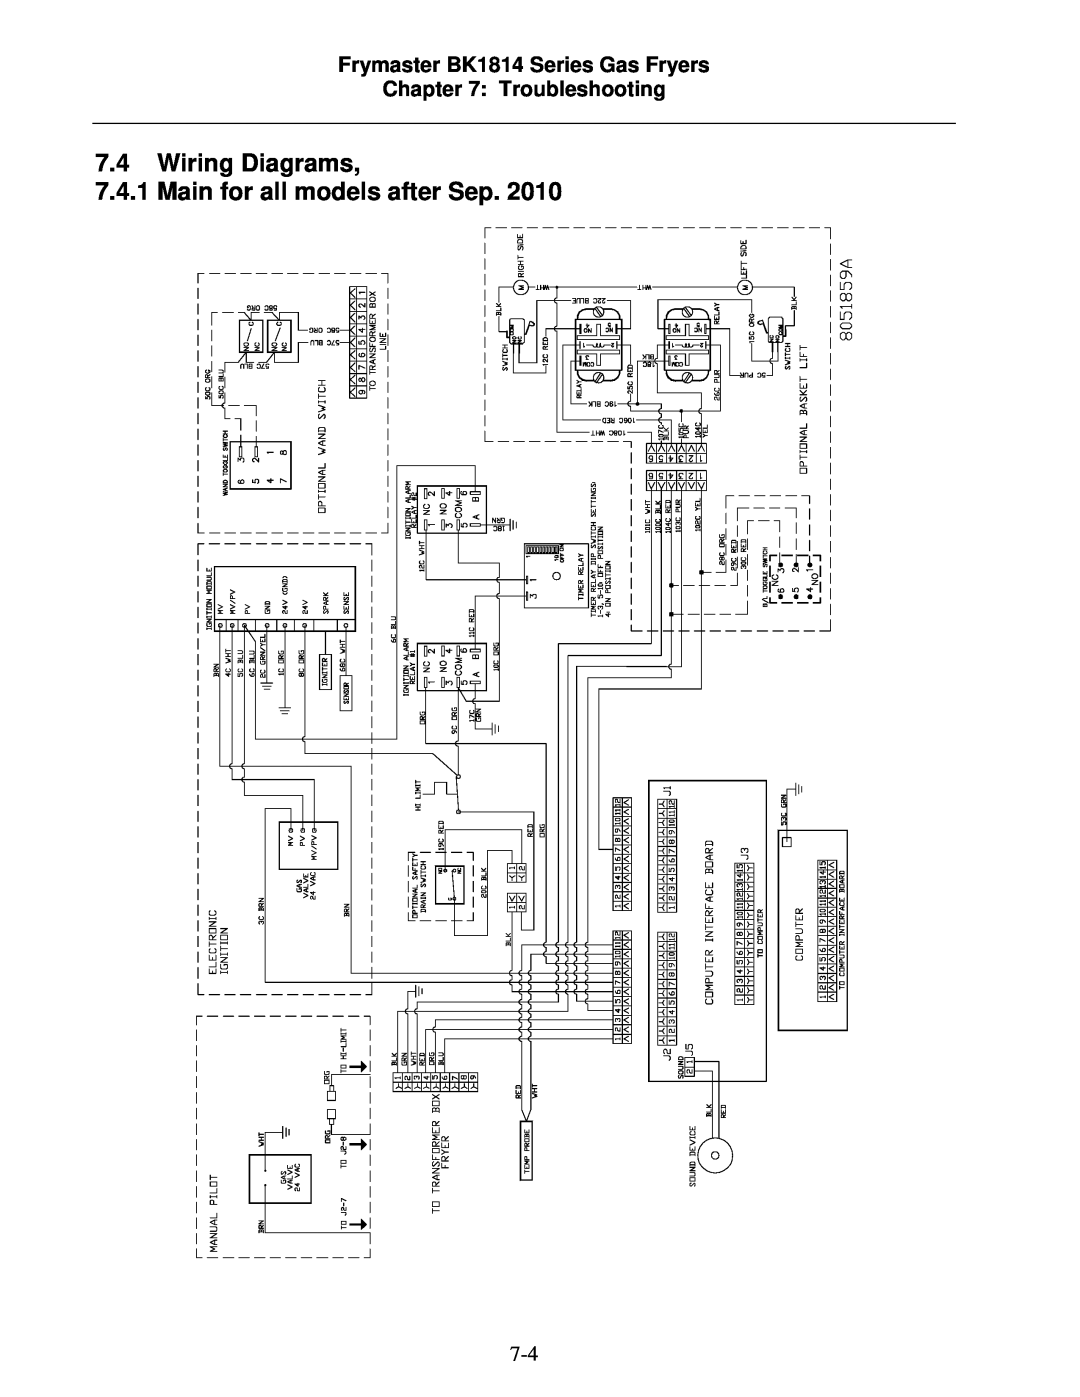 Frymaster Wiring Diagrams 7.4.1 Main for all models after Sep, Frymaster BK1814 Series Gas Fryers Troubleshooting 